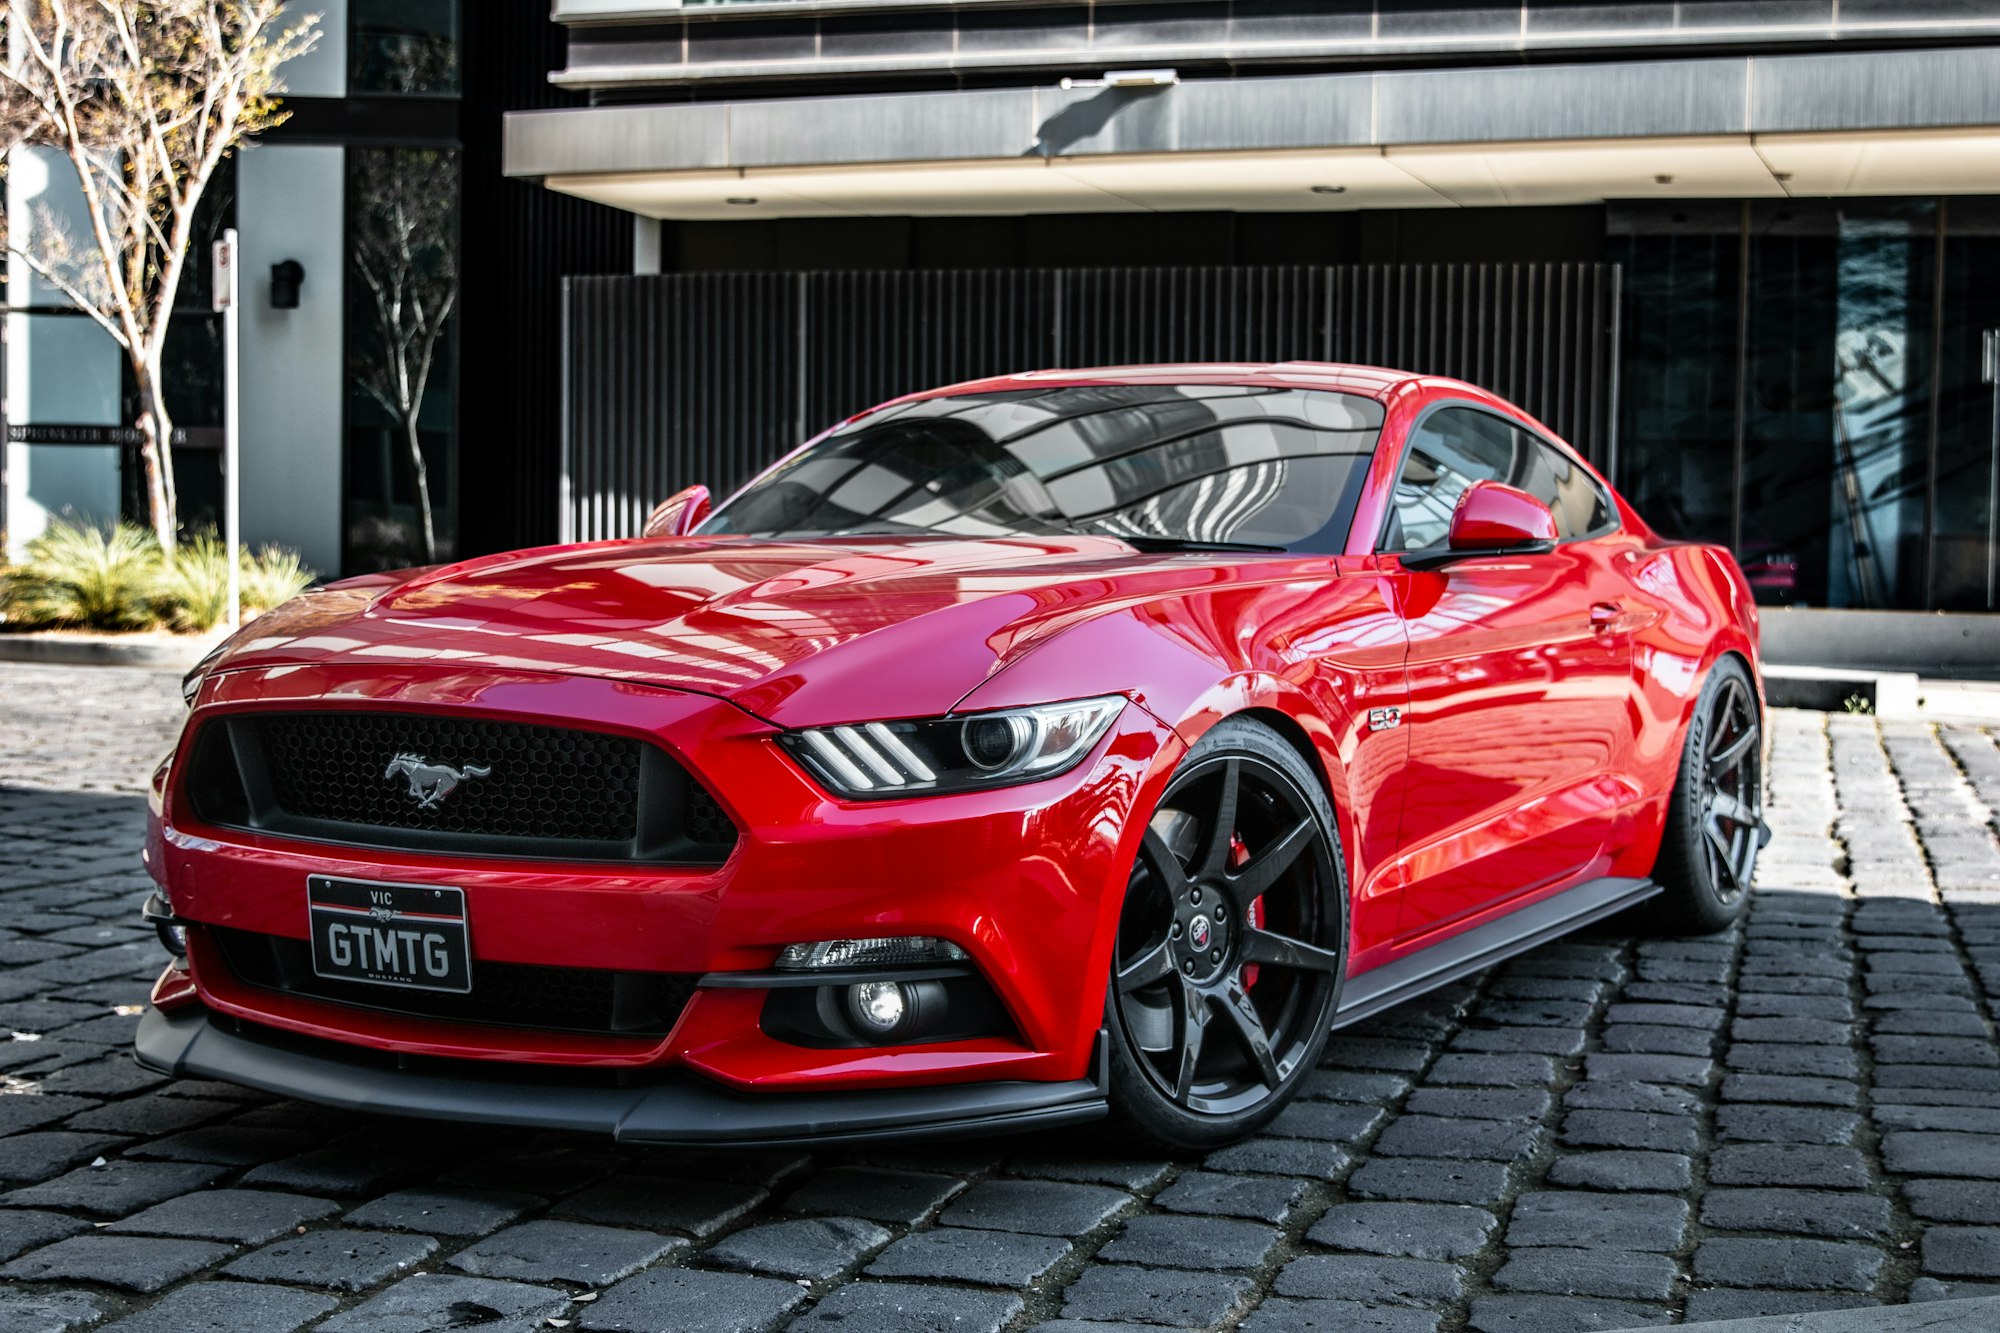 Red Ford Mustang 5.0 GT parked on a cobblestone driveway